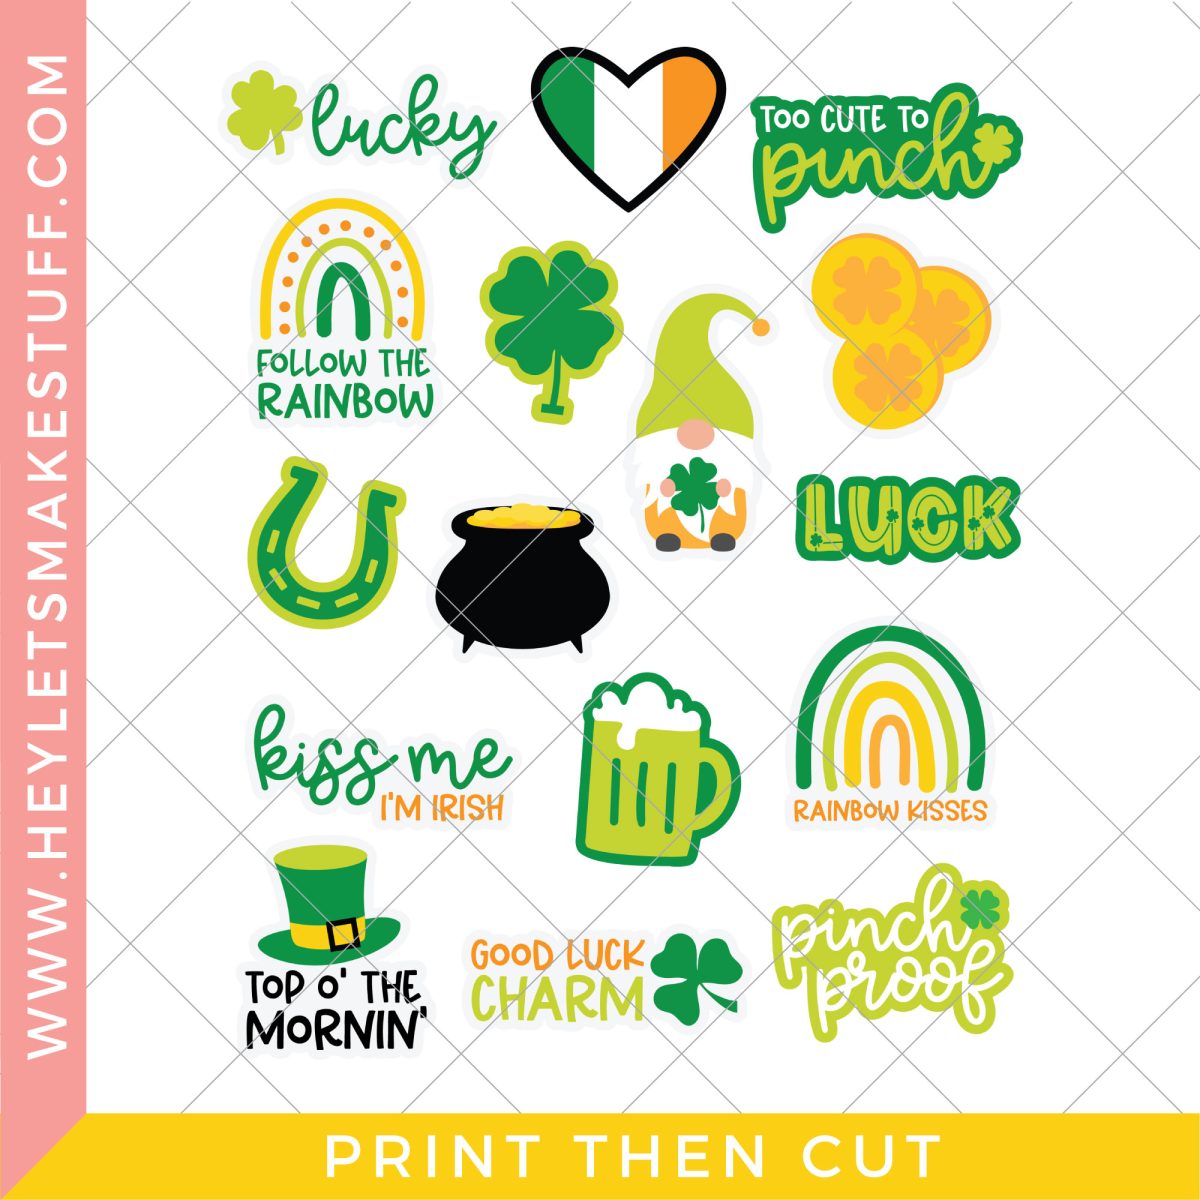 St. Patrick's Day print then cut stickers security image